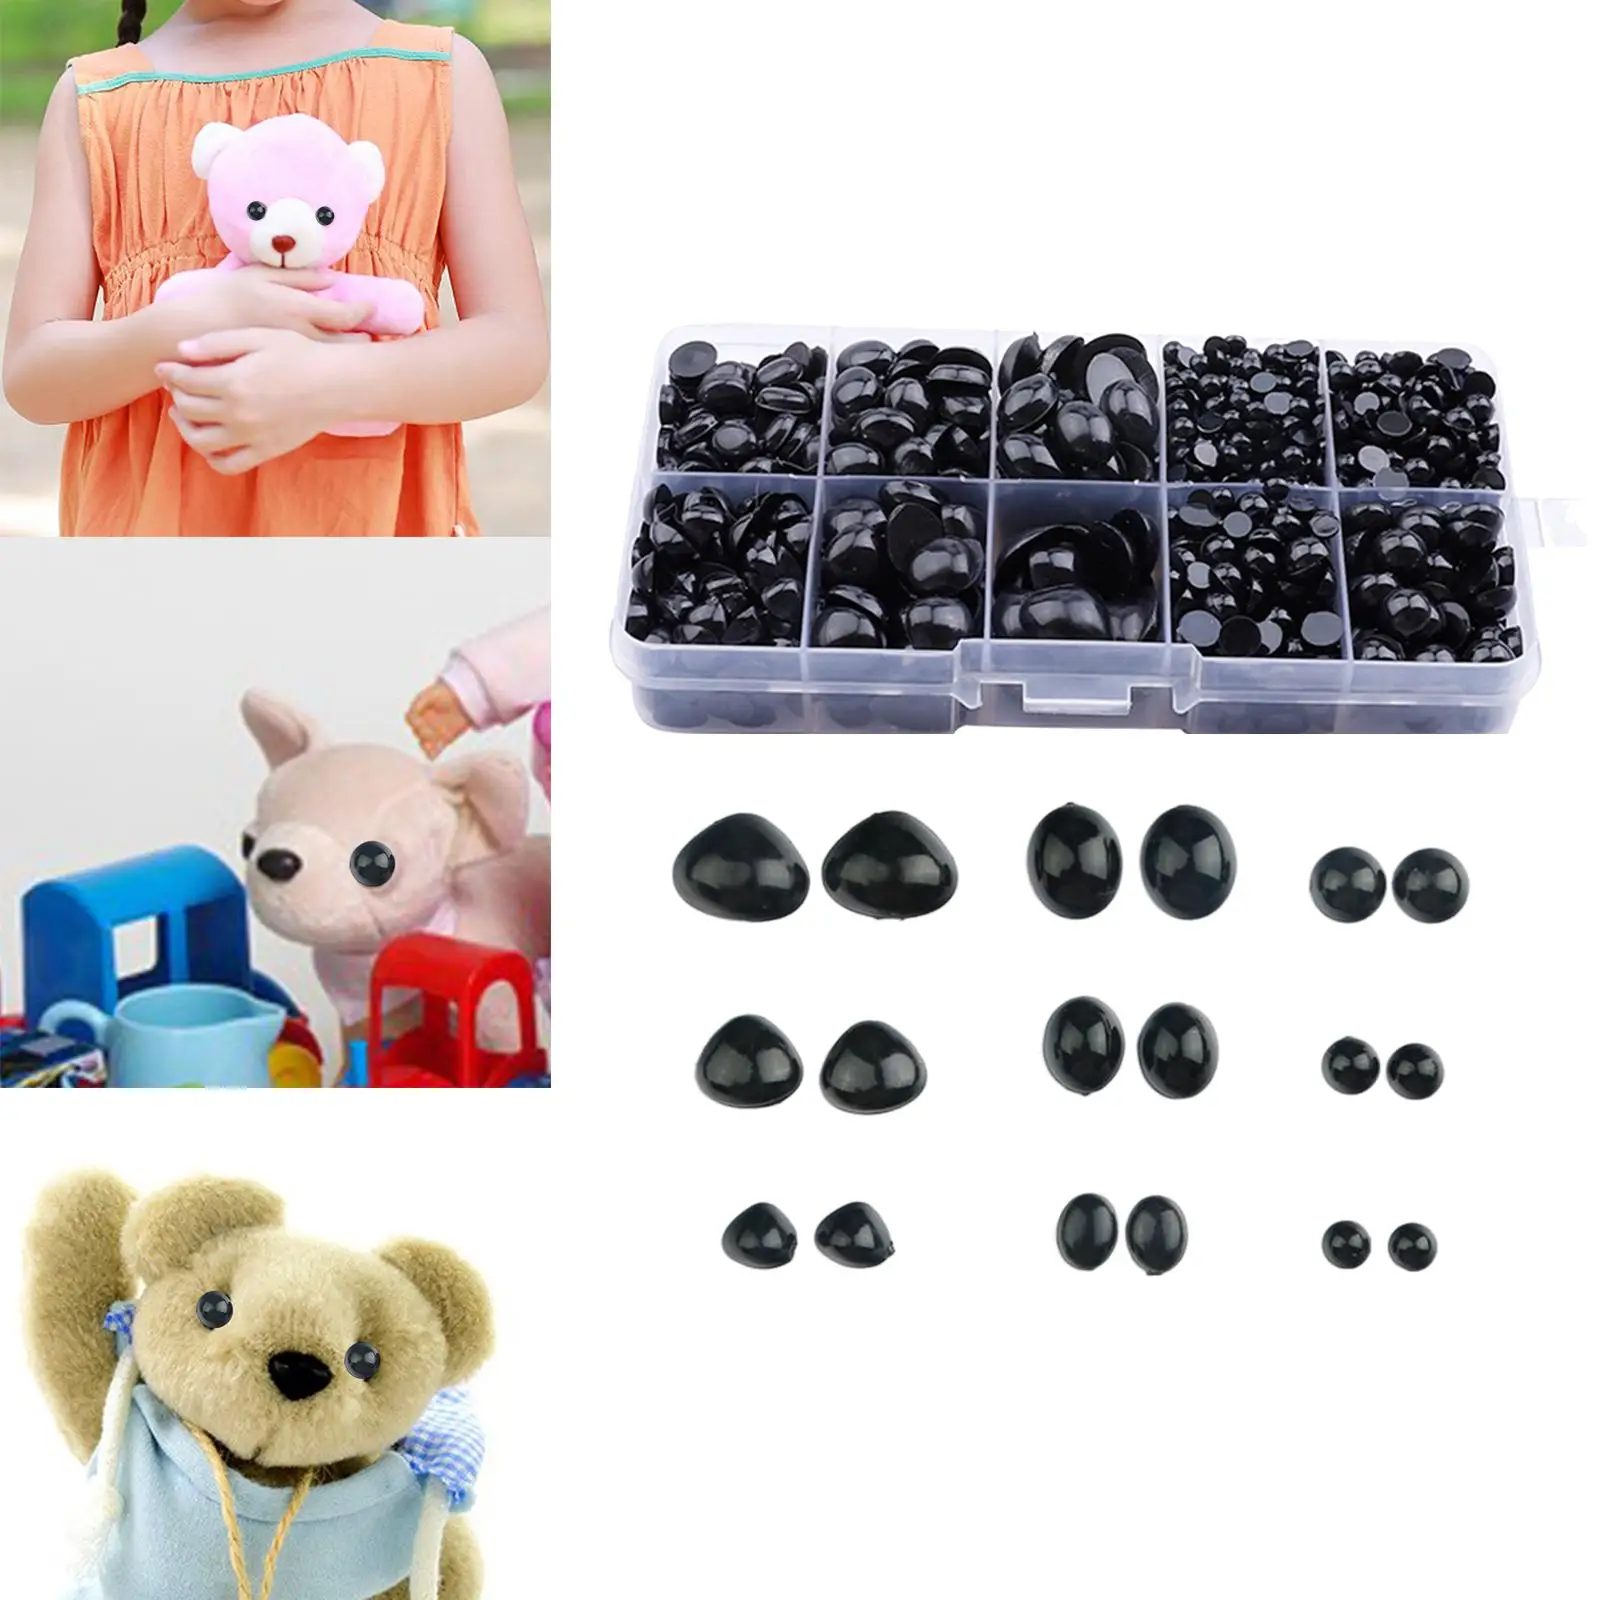 1000Pcs Plastic Safety Eyes and Noses DIY Crafts for Plush Toy Bear Stuffed Animals